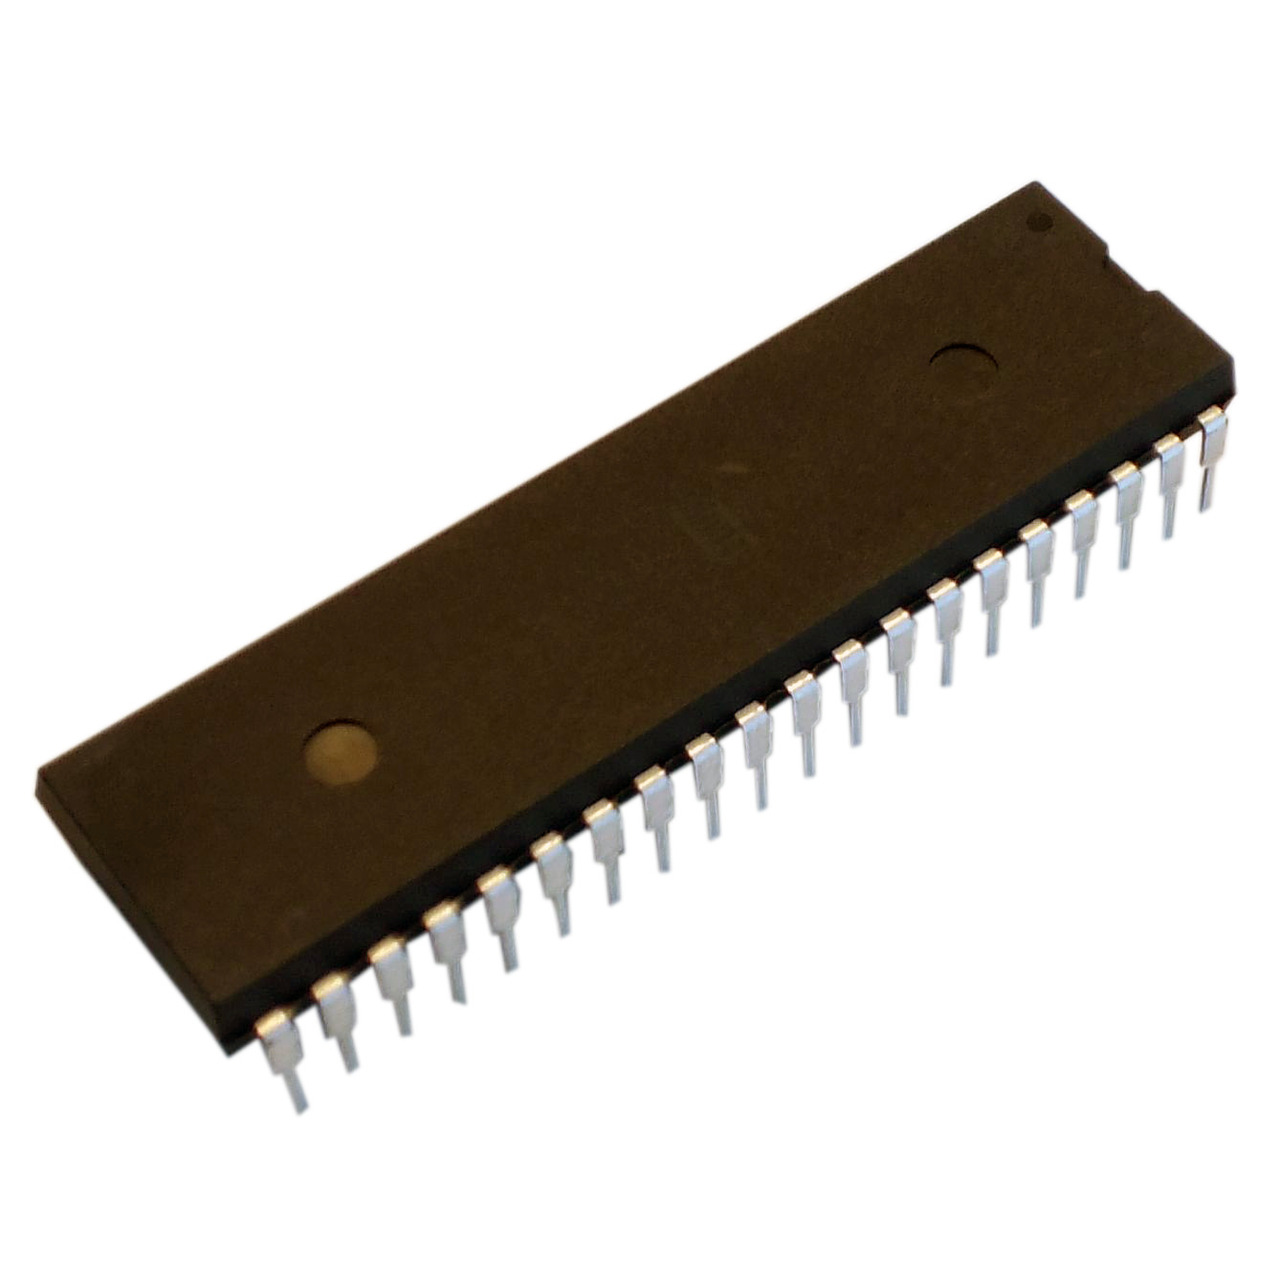 Atmel Mikrocontroller AT 89S8253-24PU- DIL-40